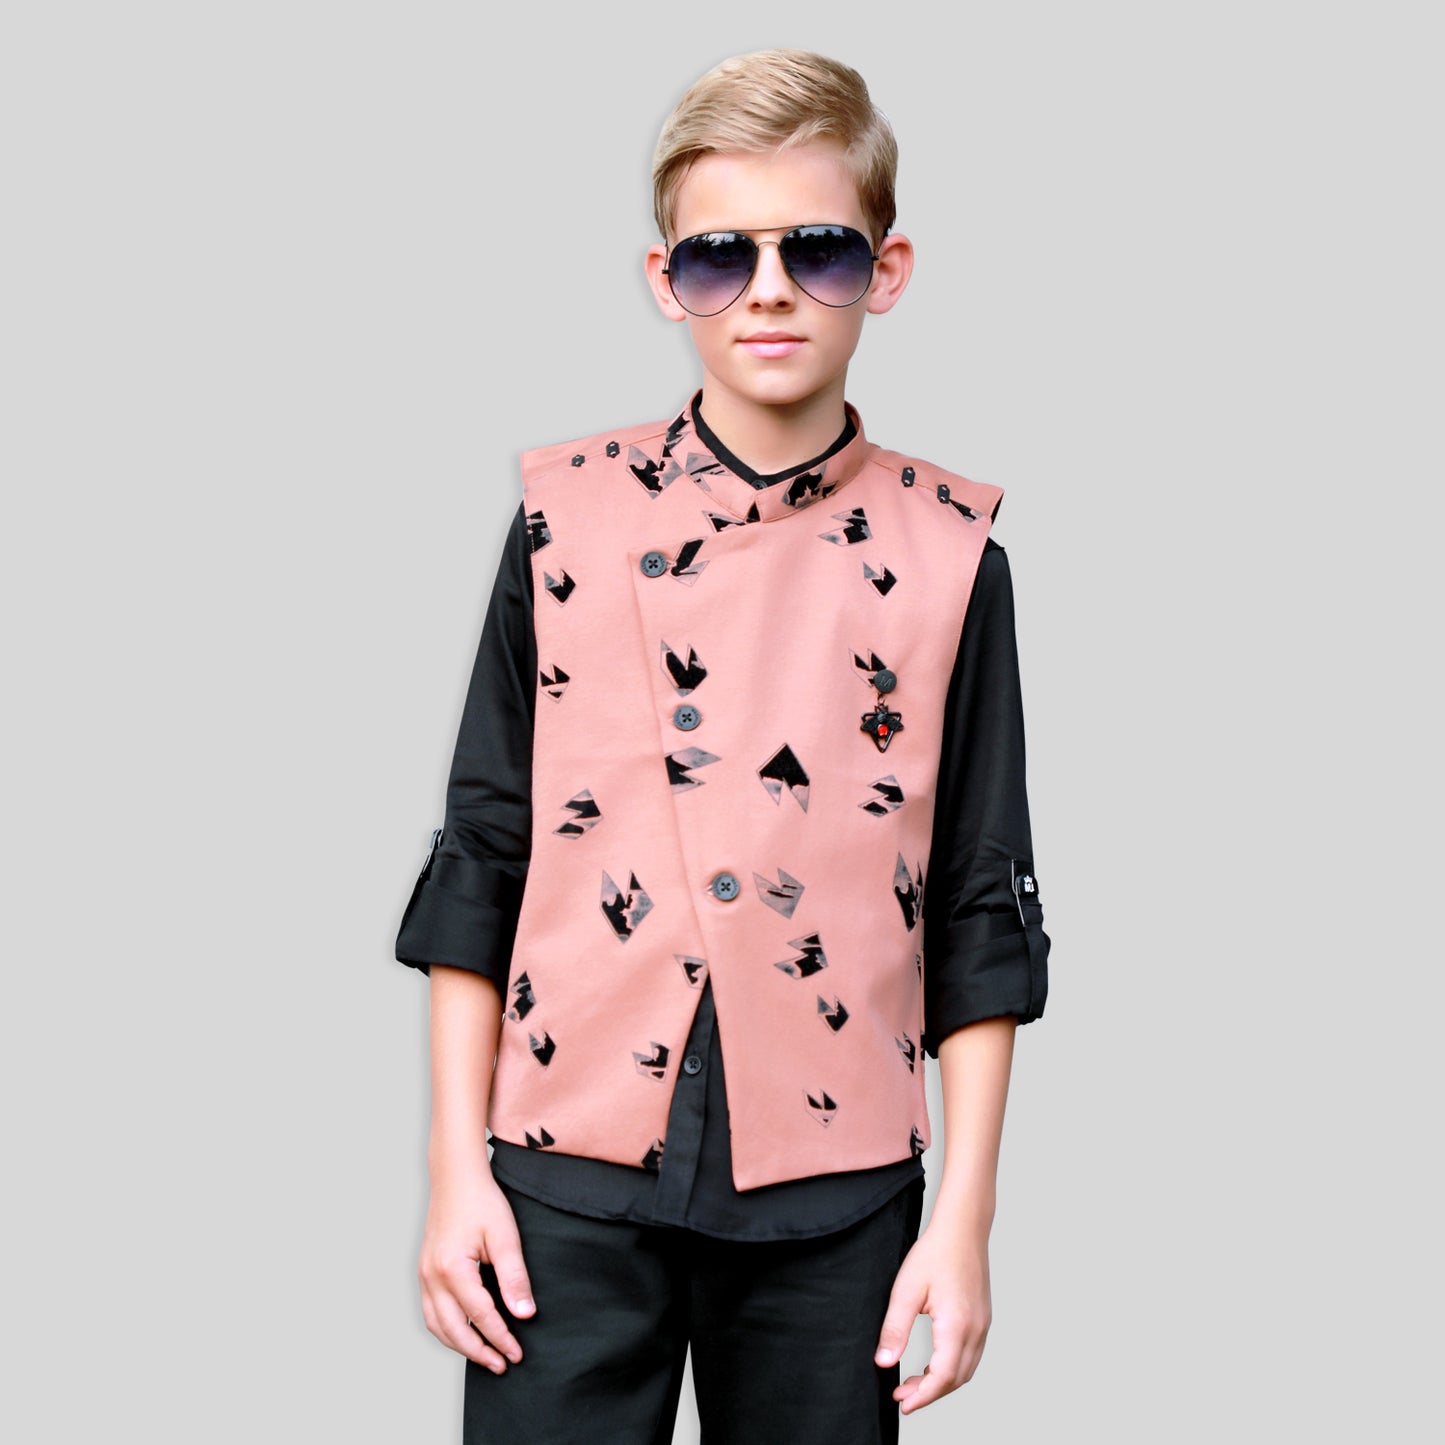 Fashionable jacket set  for Young boys